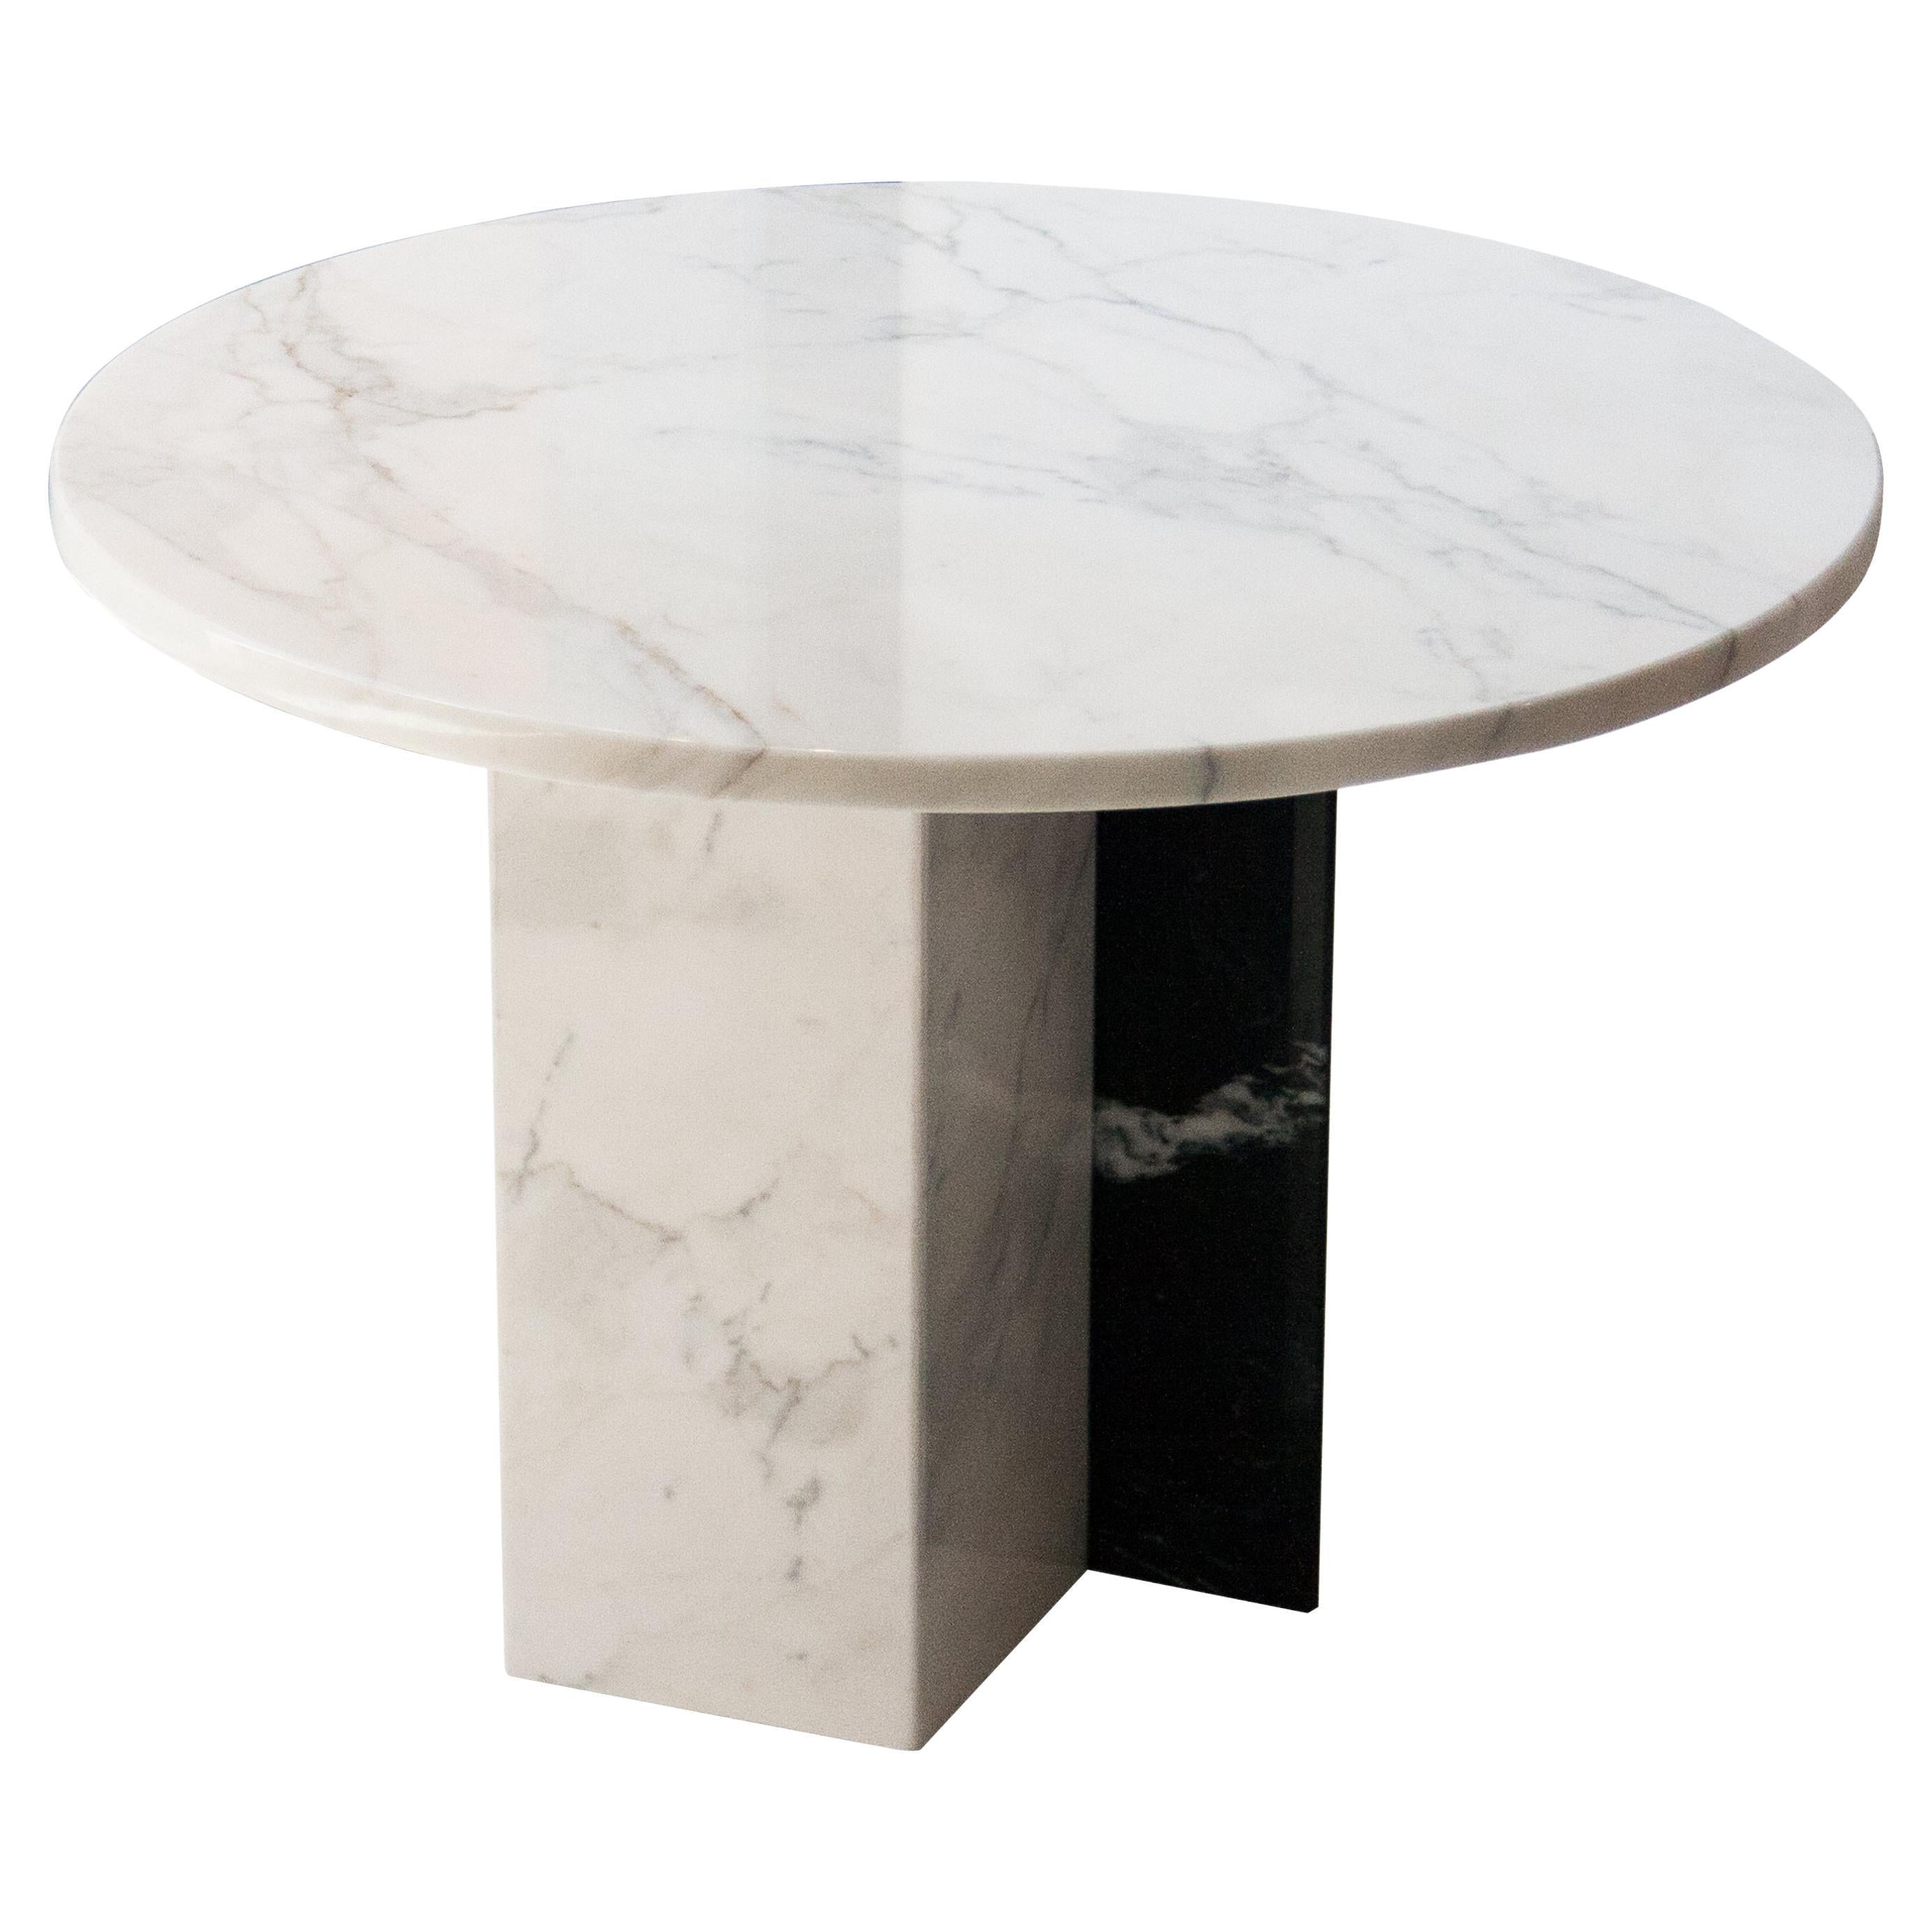 Contemporary Round Marble Coffee Table Design by IKB191, Spain, 2022 For Sale